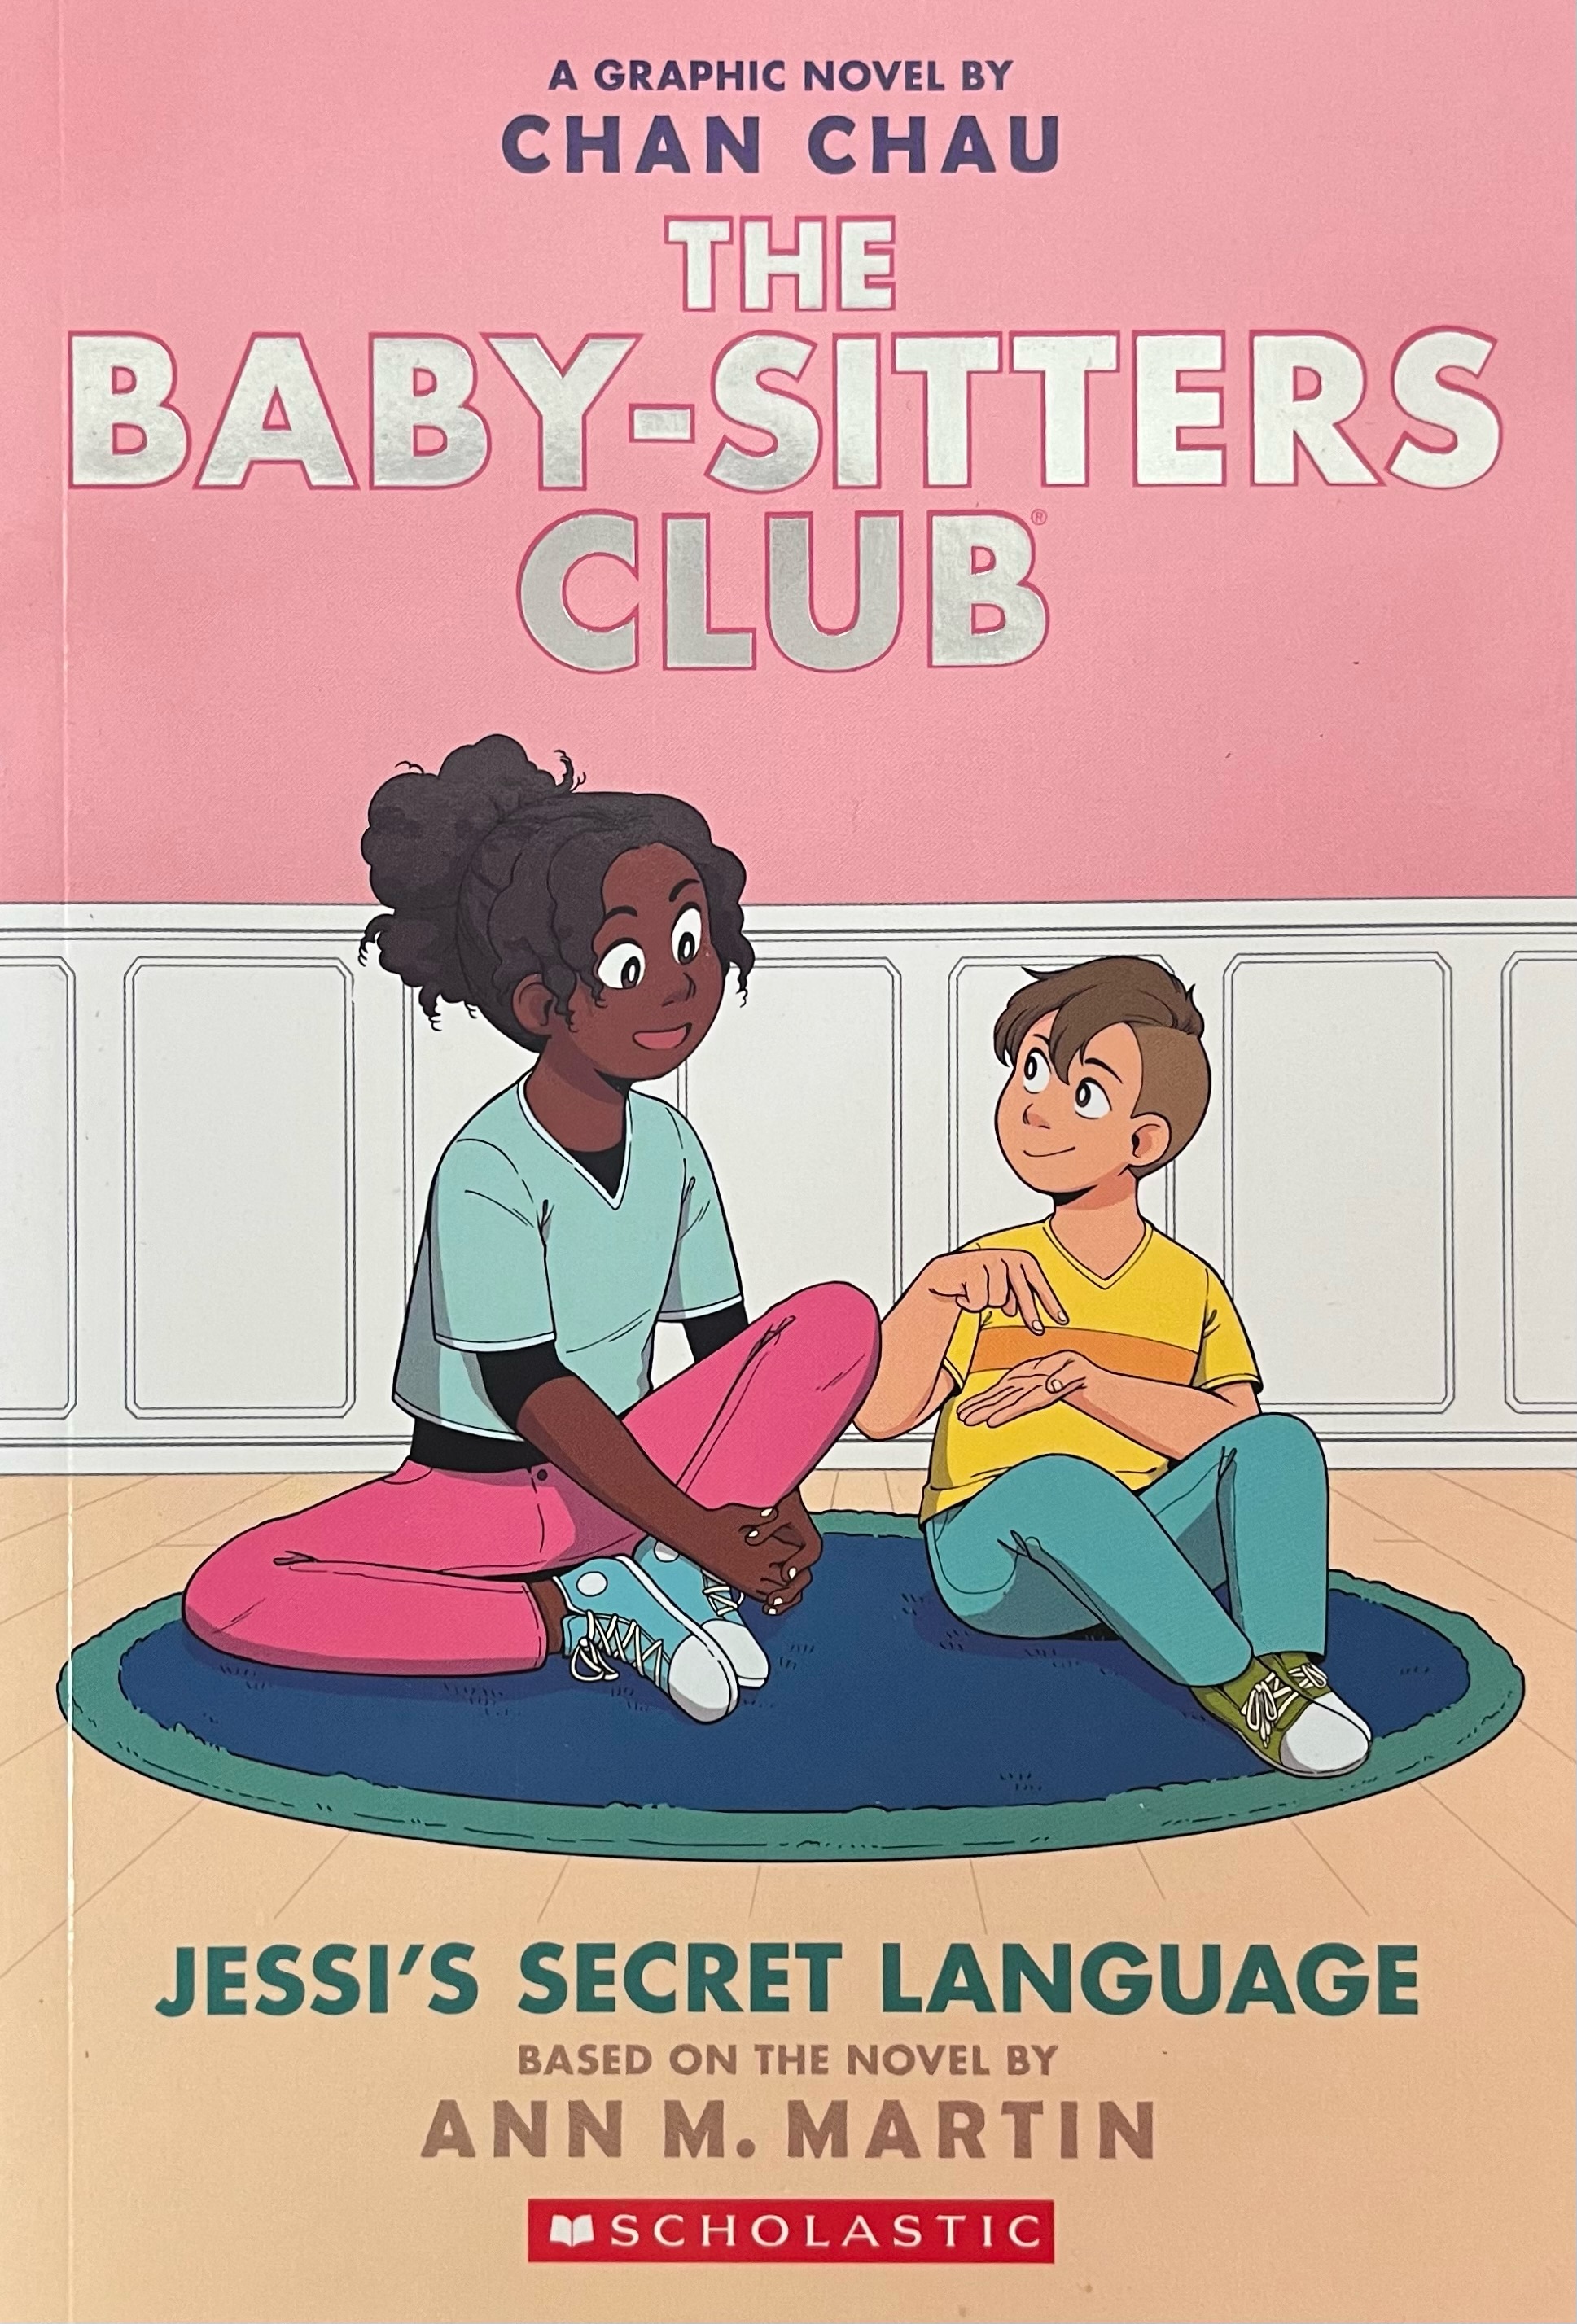 Jessi's Secret Language The Baby-Sitters Club graphic novel by Chan Chau based on Ann M. Martin books